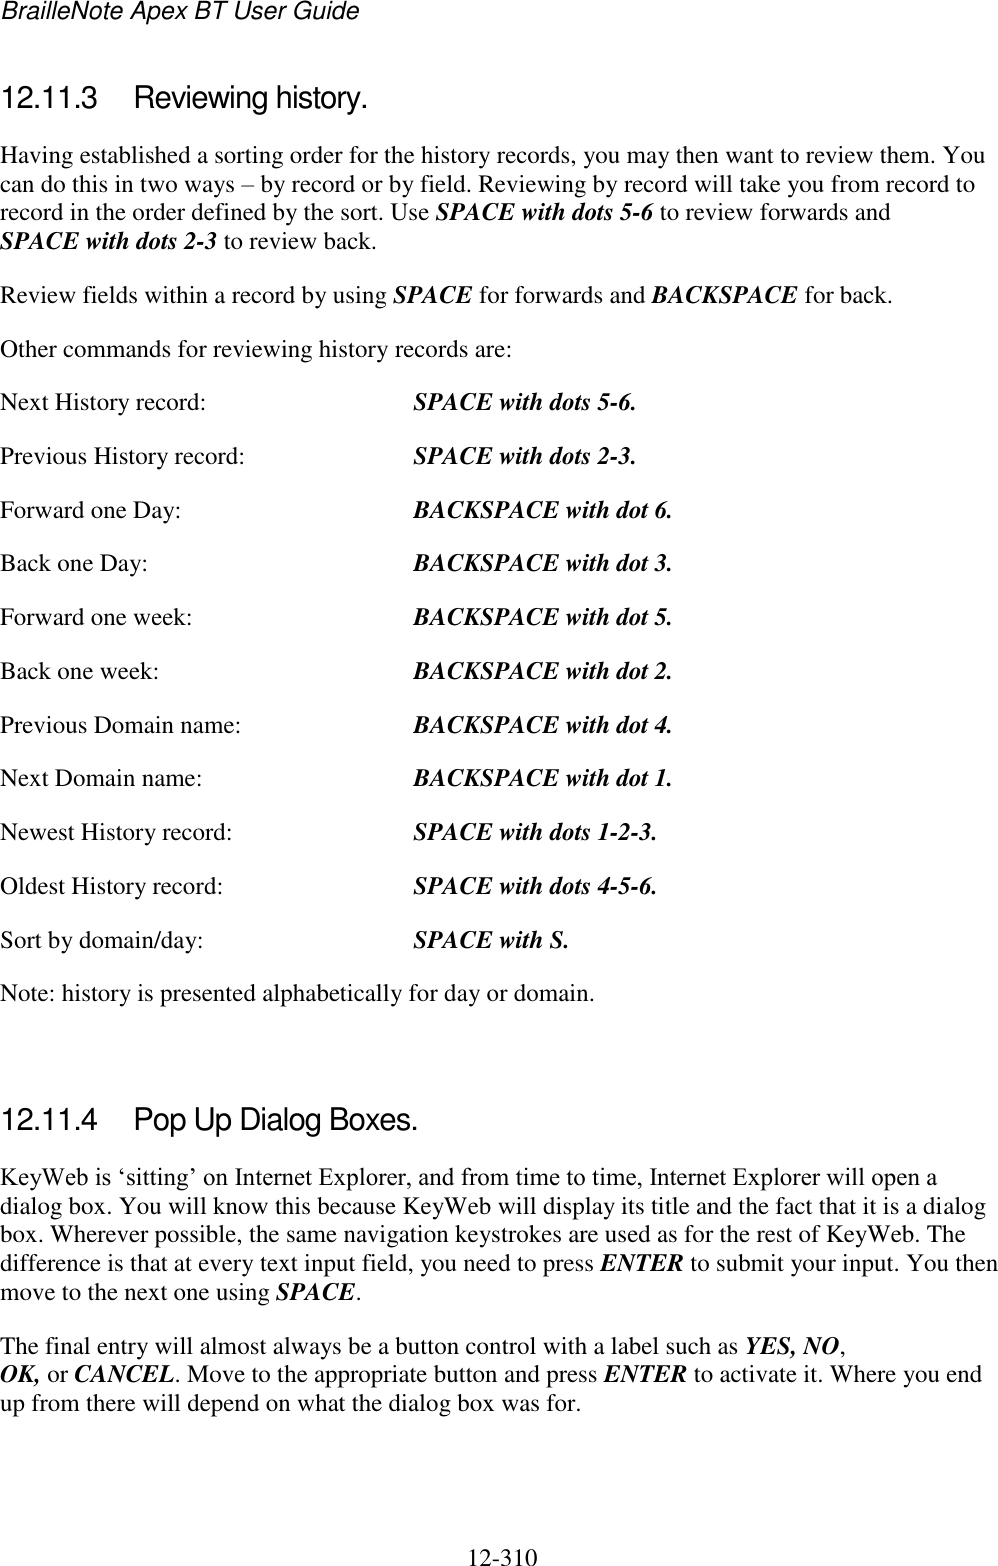 BrailleNote Apex BT User Guide   12-310   12.11.3  Reviewing history. Having established a sorting order for the history records, you may then want to review them. You can do this in two ways – by record or by field. Reviewing by record will take you from record to record in the order defined by the sort. Use SPACE with dots 5-6 to review forwards and SPACE with dots 2-3 to review back. Review fields within a record by using SPACE for forwards and BACKSPACE for back. Other commands for reviewing history records are: Next History record:  SPACE with dots 5-6. Previous History record:   SPACE with dots 2-3. Forward one Day:  BACKSPACE with dot 6. Back one Day:  BACKSPACE with dot 3. Forward one week:  BACKSPACE with dot 5. Back one week:  BACKSPACE with dot 2. Previous Domain name:  BACKSPACE with dot 4. Next Domain name:  BACKSPACE with dot 1. Newest History record:  SPACE with dots 1-2-3. Oldest History record:  SPACE with dots 4-5-6. Sort by domain/day:  SPACE with S. Note: history is presented alphabetically for day or domain.   12.11.4  Pop Up Dialog Boxes. KeyWeb is „sitting‟ on Internet Explorer, and from time to time, Internet Explorer will open a dialog box. You will know this because KeyWeb will display its title and the fact that it is a dialog box. Wherever possible, the same navigation keystrokes are used as for the rest of KeyWeb. The difference is that at every text input field, you need to press ENTER to submit your input. You then move to the next one using SPACE. The final entry will almost always be a button control with a label such as YES, NO, OK, or CANCEL. Move to the appropriate button and press ENTER to activate it. Where you end up from there will depend on what the dialog box was for.   